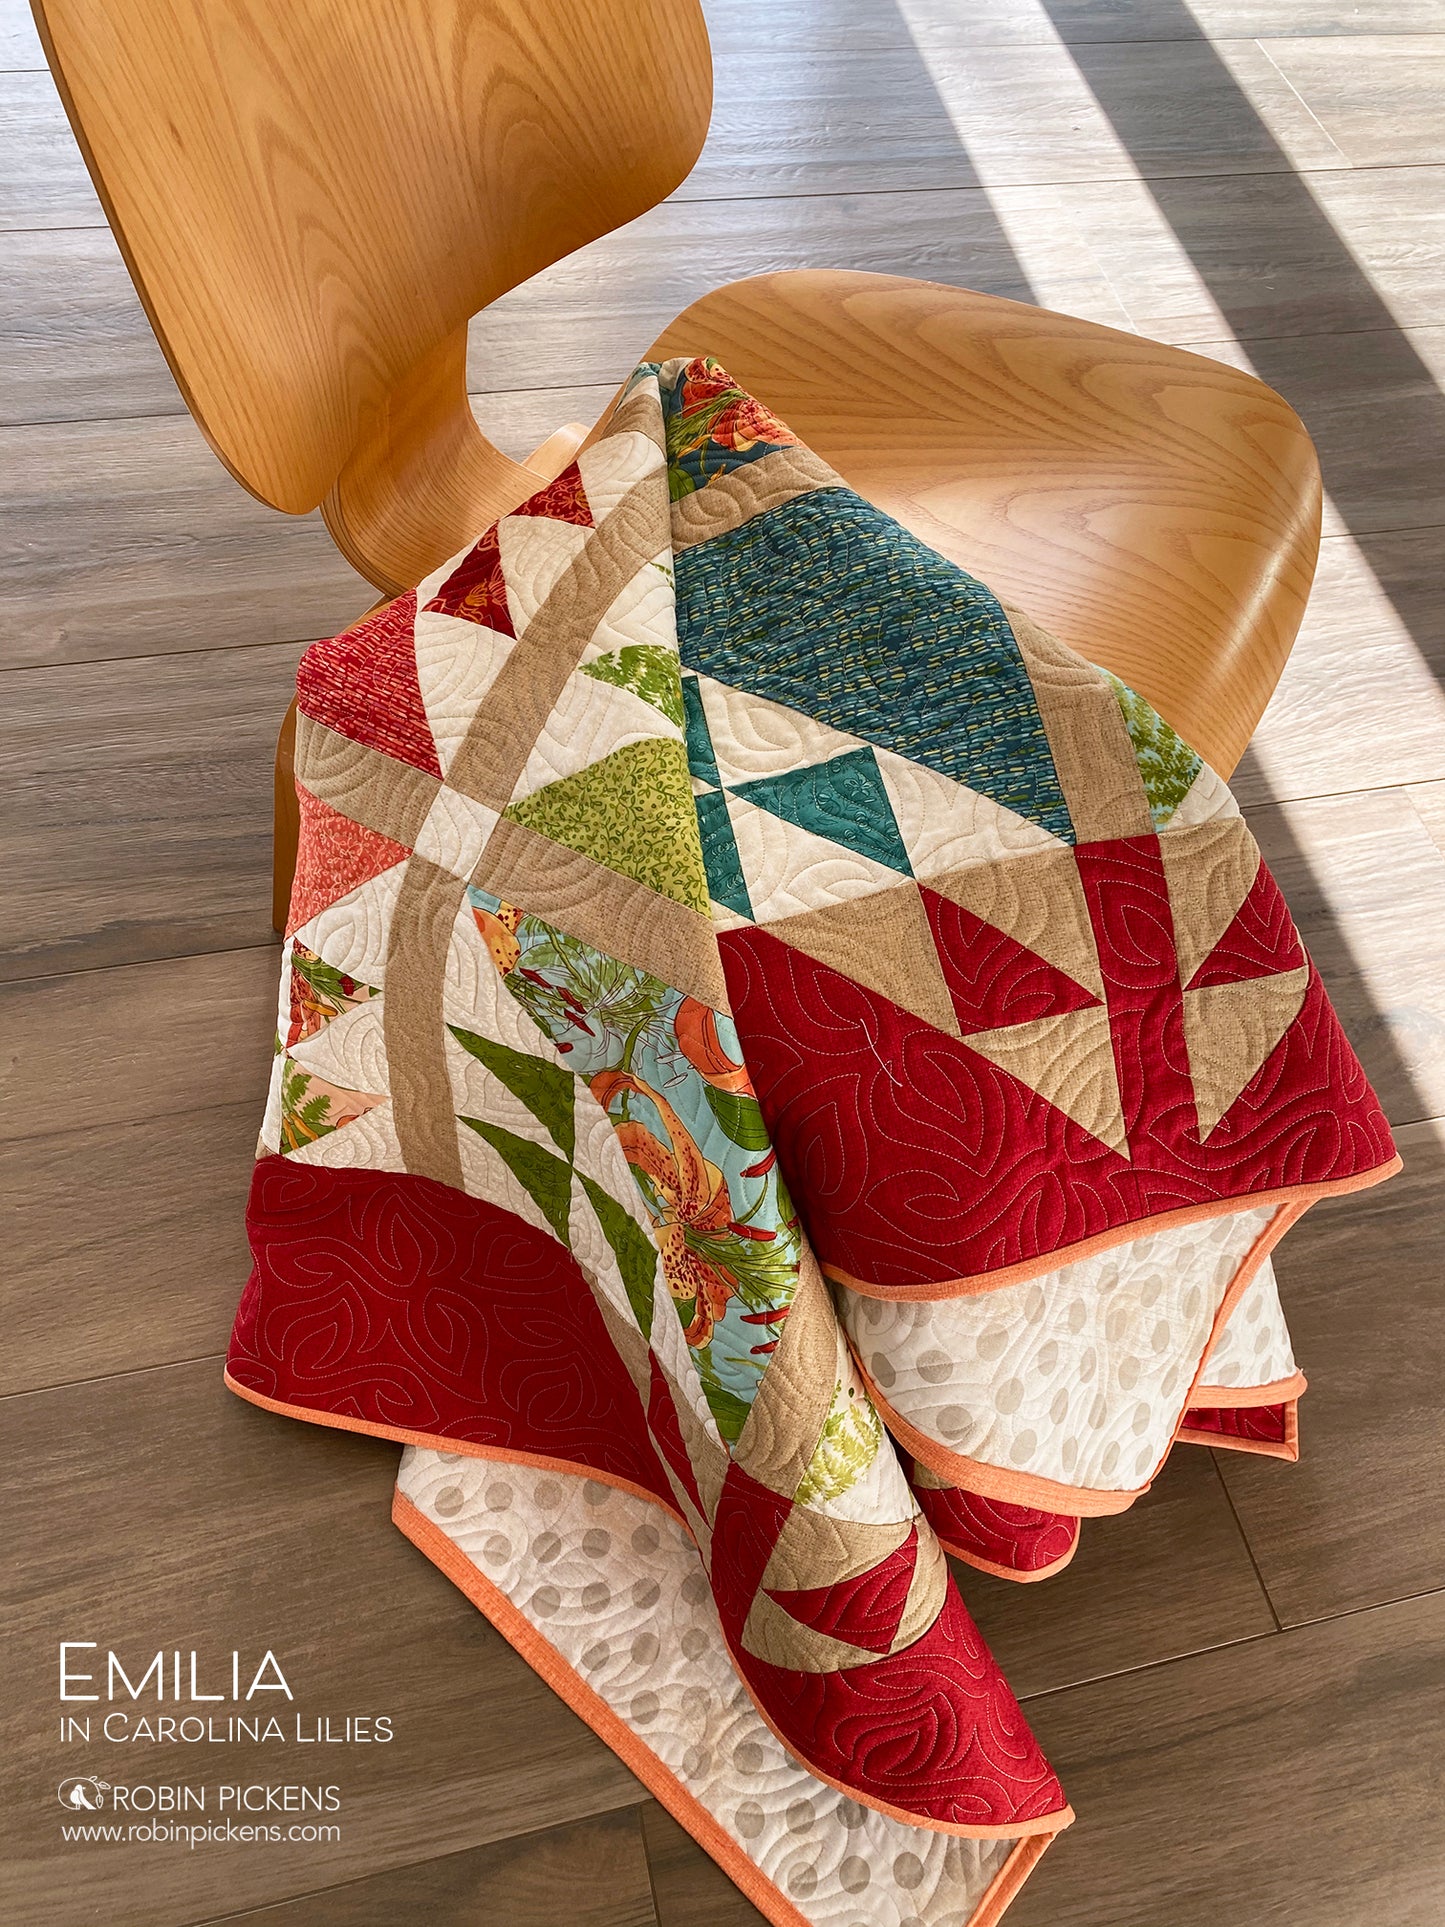 EMILIA Quilt Pattern (printed booklet) by Robin Pickens  76" or 55" square